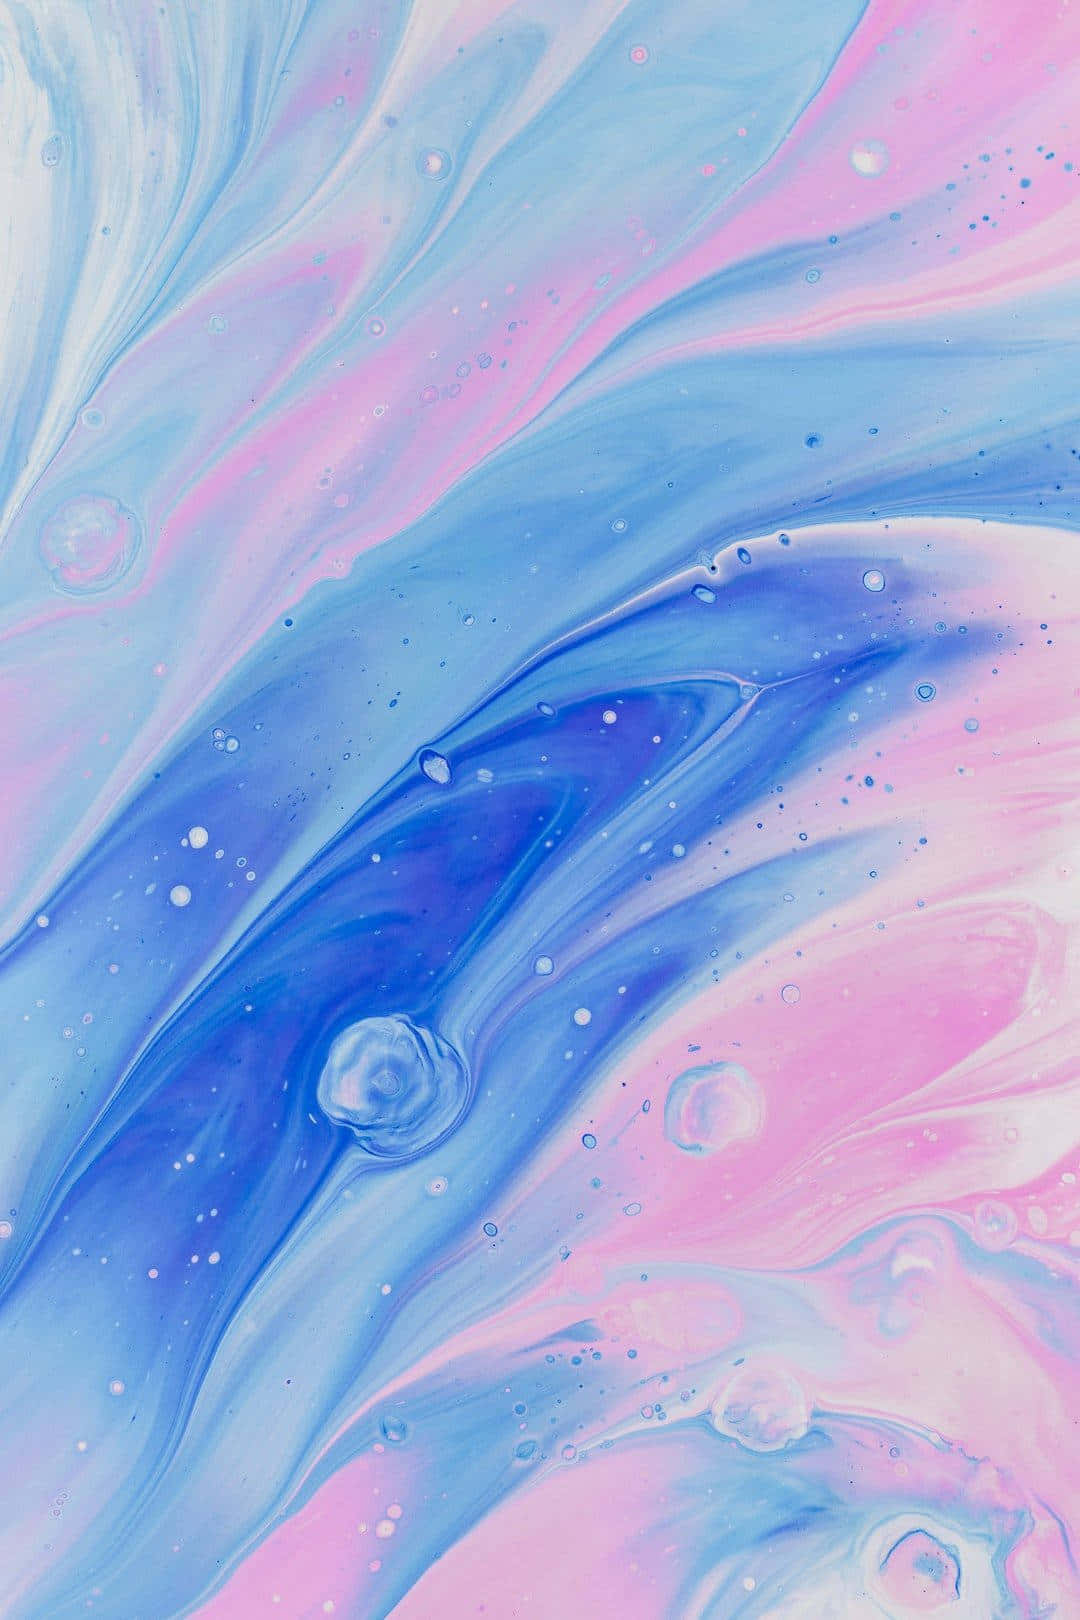 Be Captivated By the Mystical Beauty of This Majestic Pastel Abstract